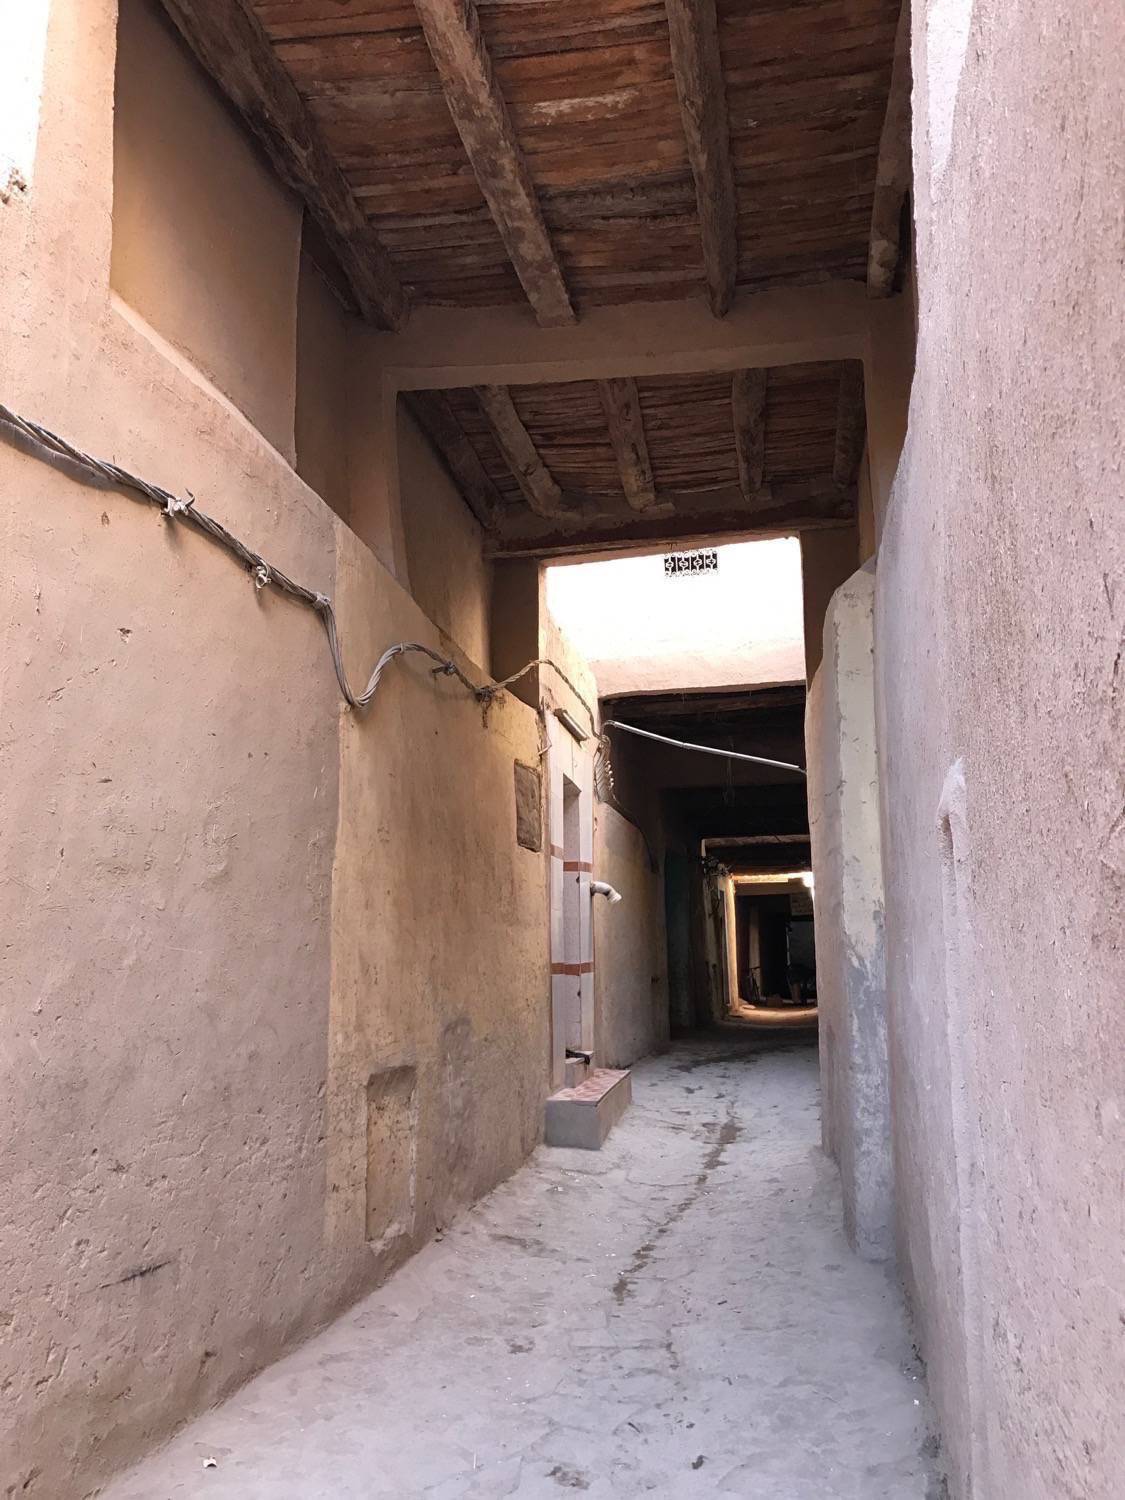 Ksar Rissani - Once inside the Ksar, sunlight gives way to narrow covered alleyways and a substantial drop in ambient temperature 